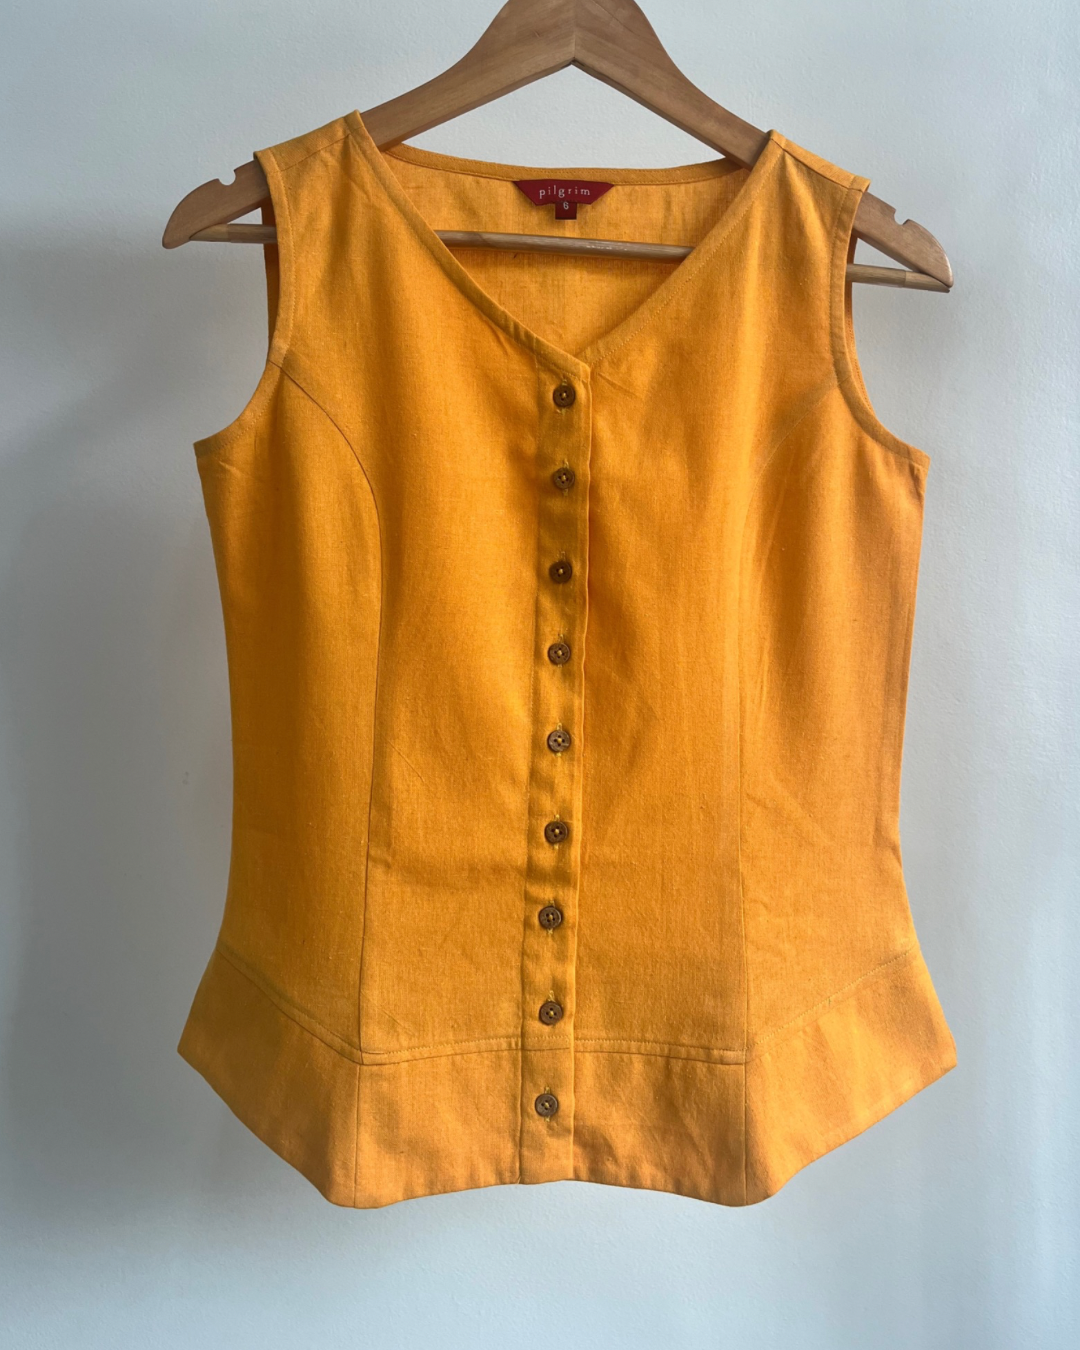 Butterfly Jacket - Yellow Cotton